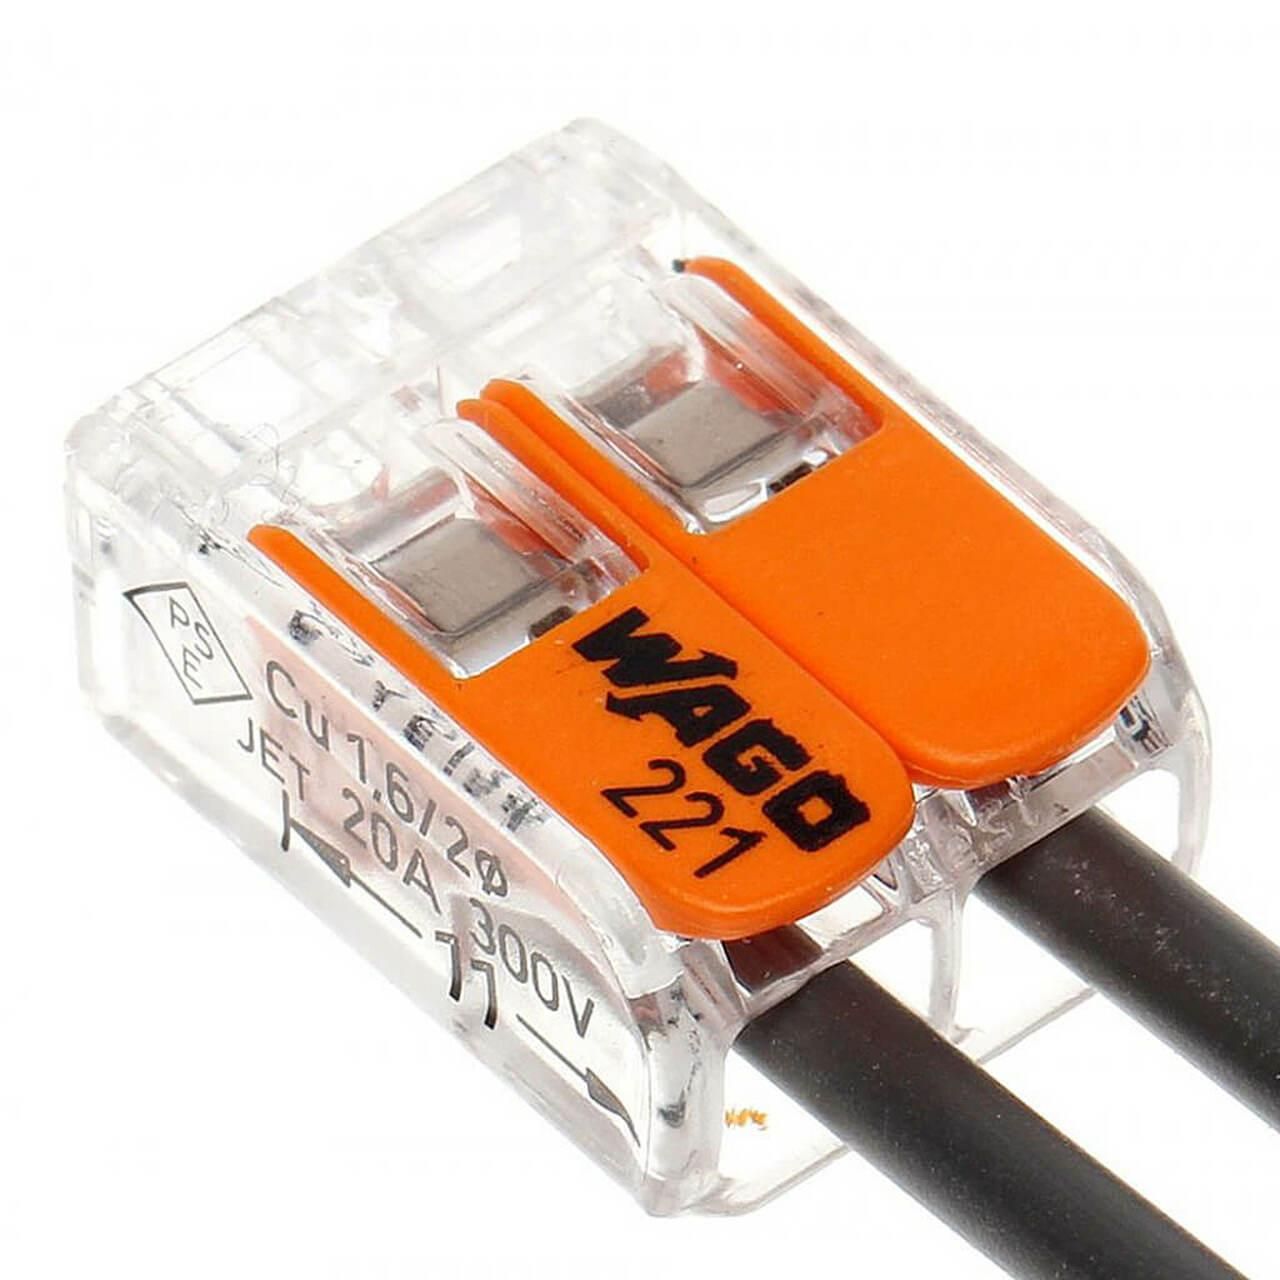 Wago 221 Slim Series Electrical Connectors Wire Block Clamp Cable